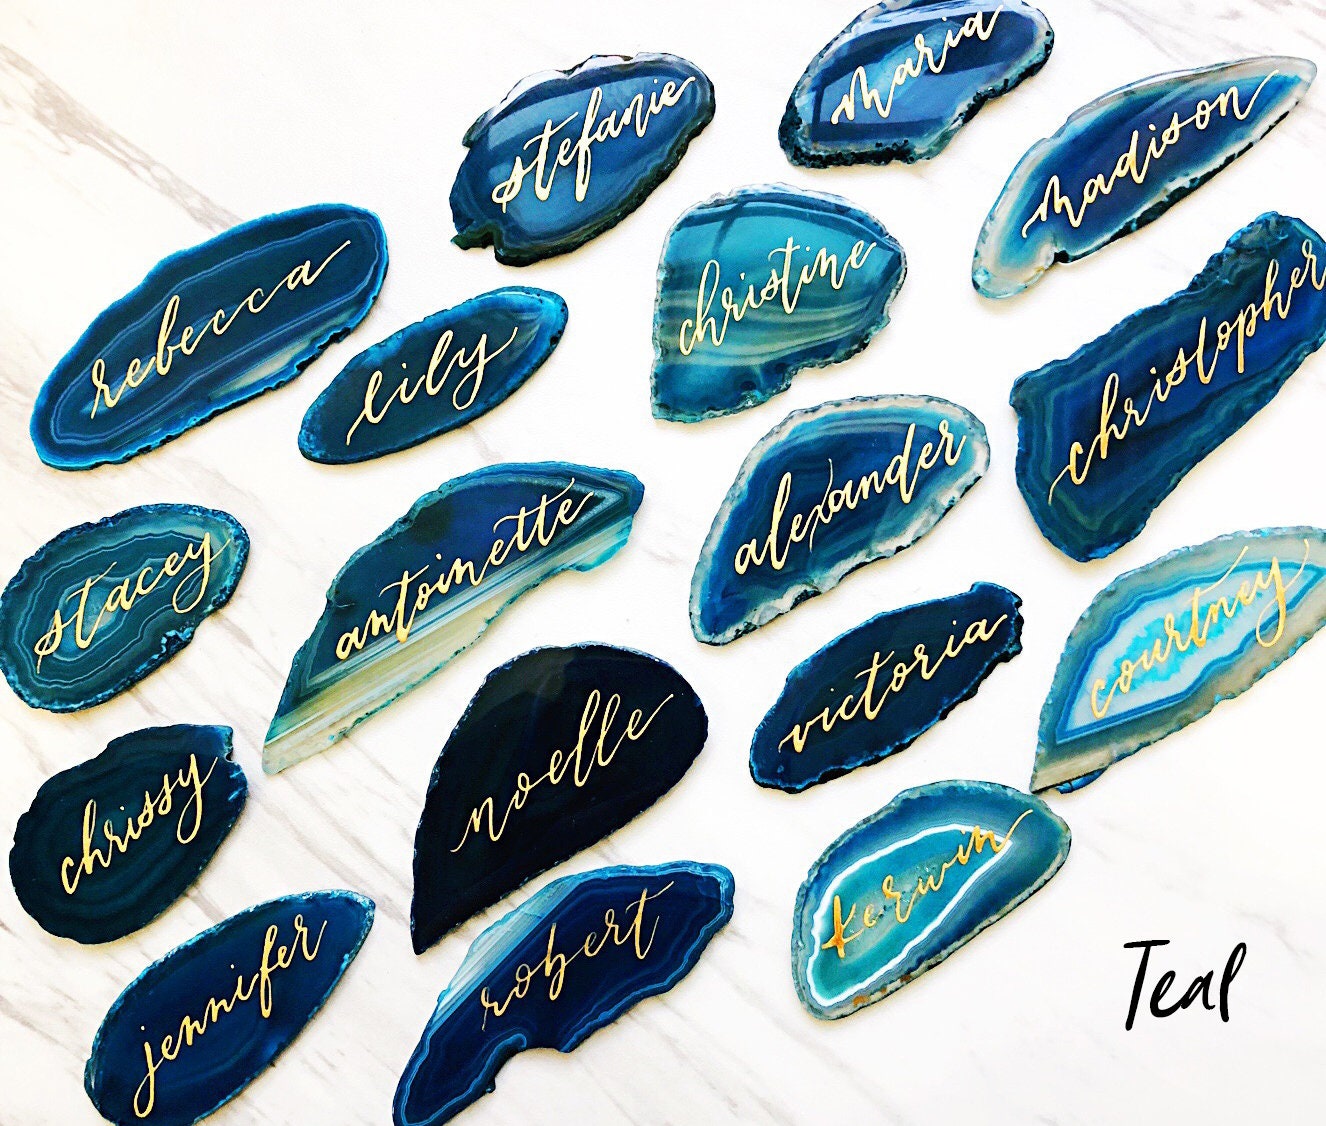 2.5" - 3" Blue Agate Slice Calligraphy Name Place Cards | Agate Calligraphy Name Cards